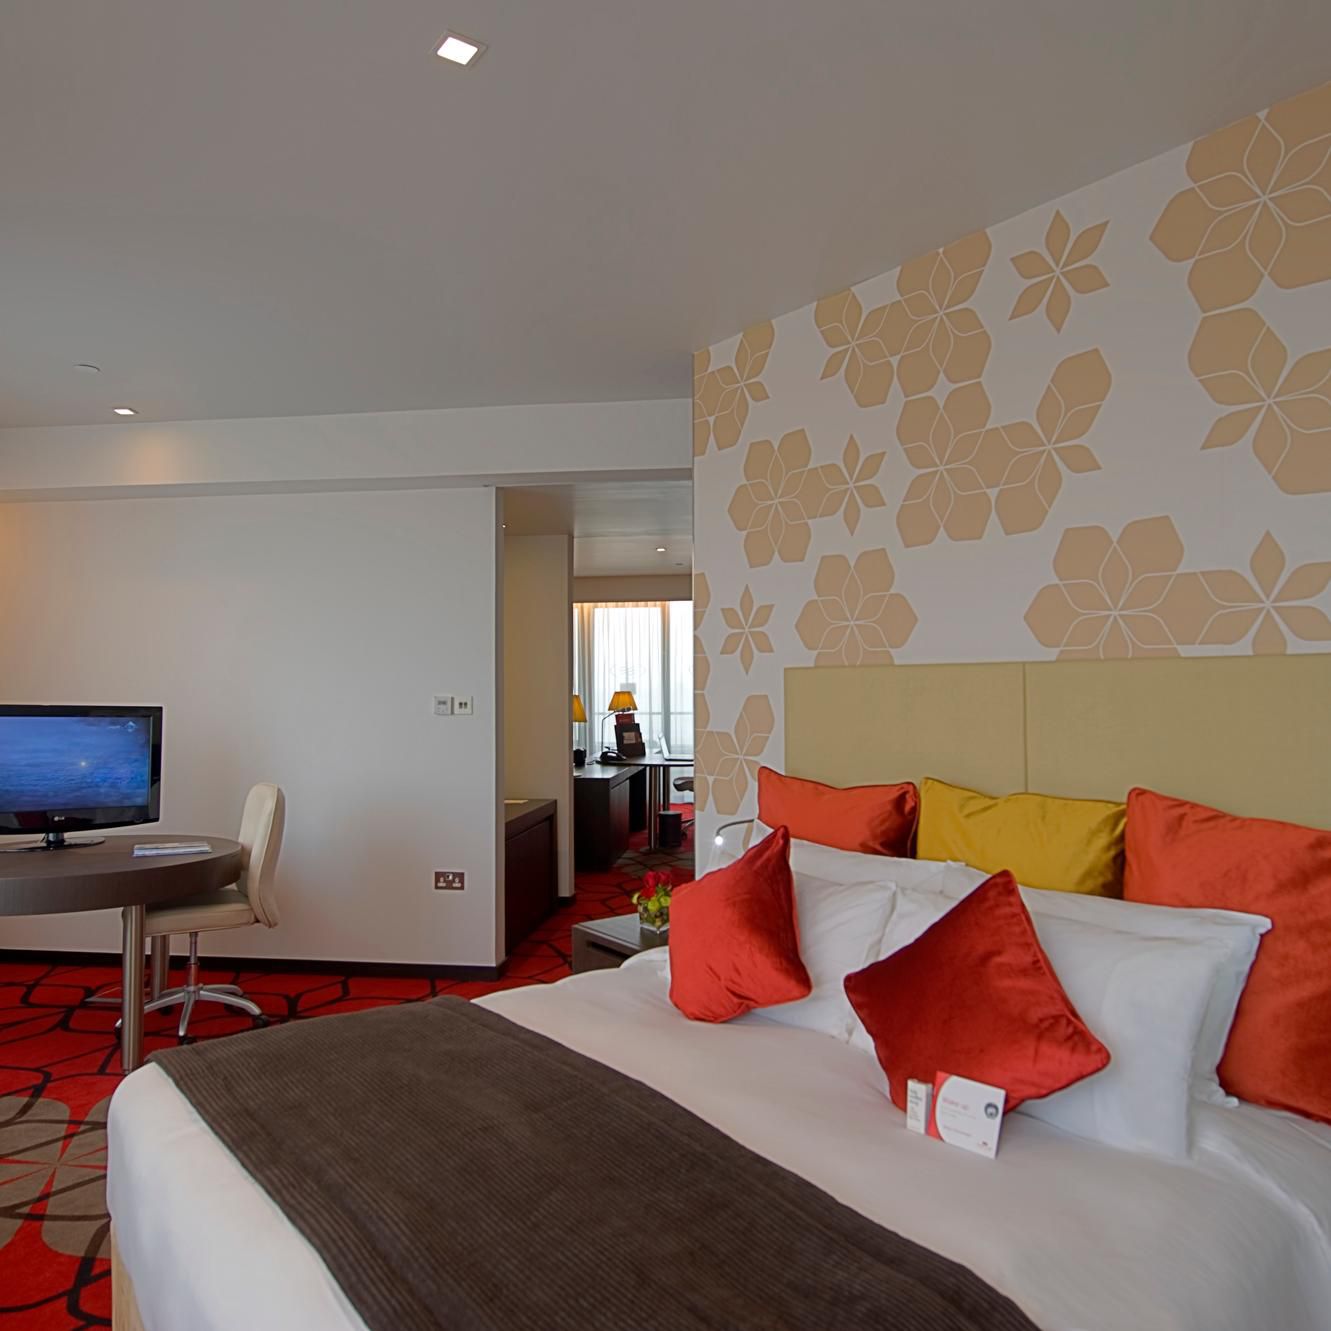 The Club Suite will bring you the most comfortable stay